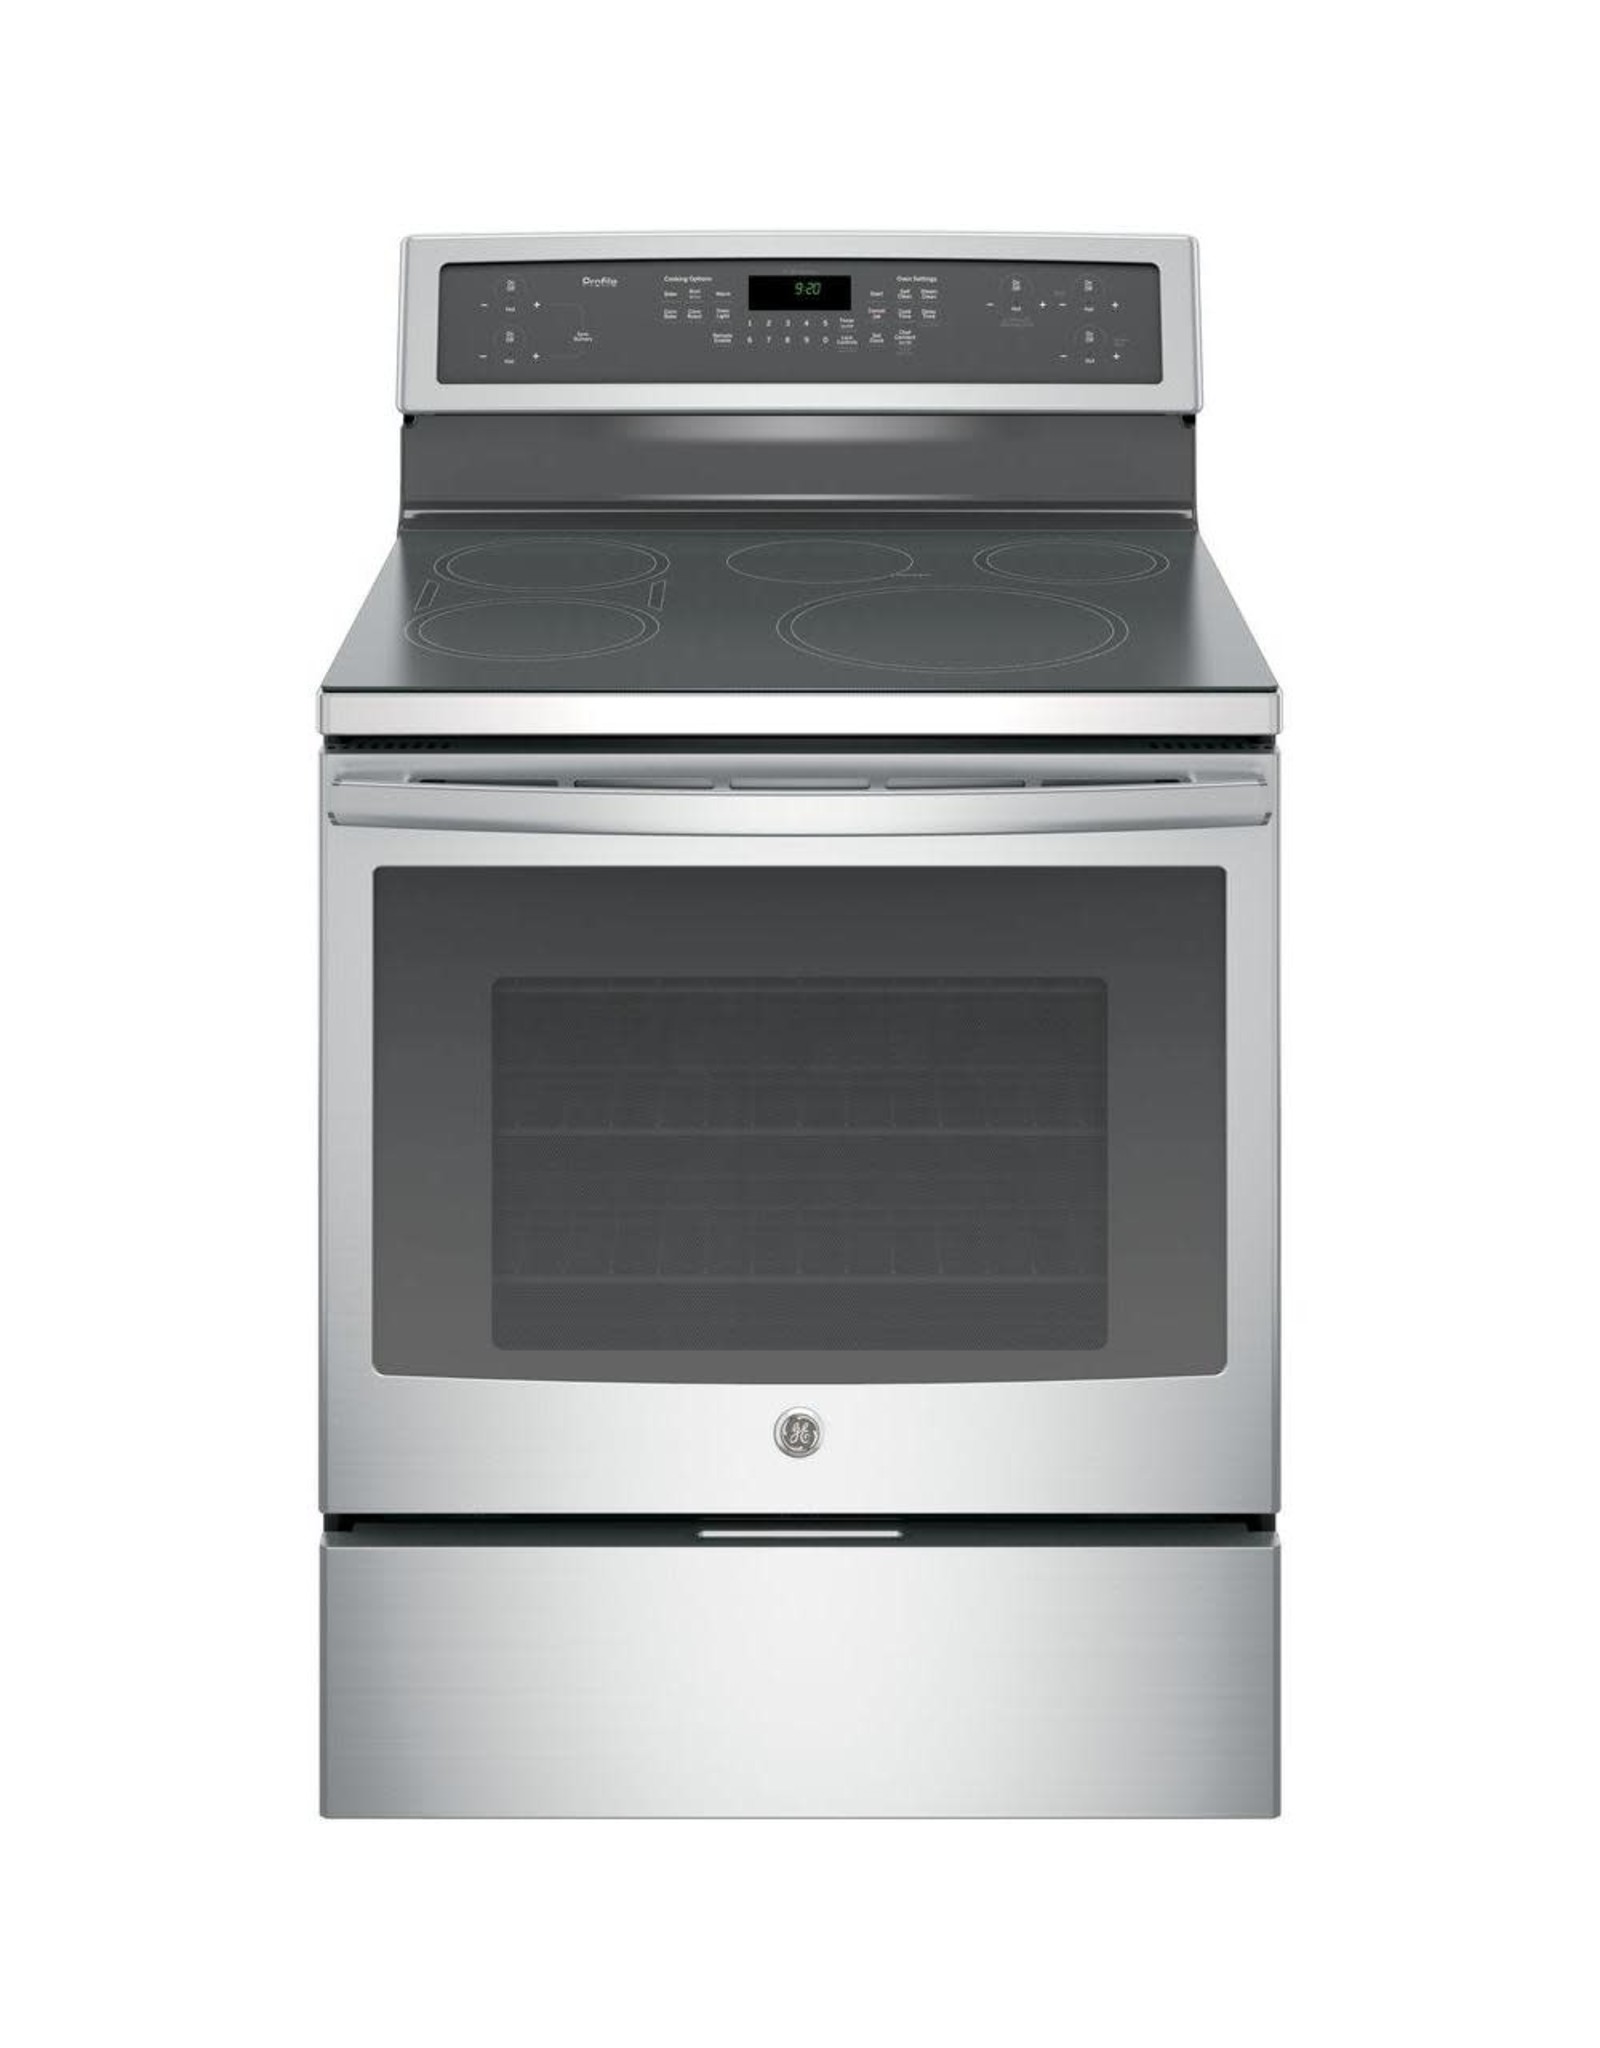 GE PHB920SJSS GE Profile 5.3 cu. ft. Smart Induction Range with Self-Cleaning Convection in Stainless Steel